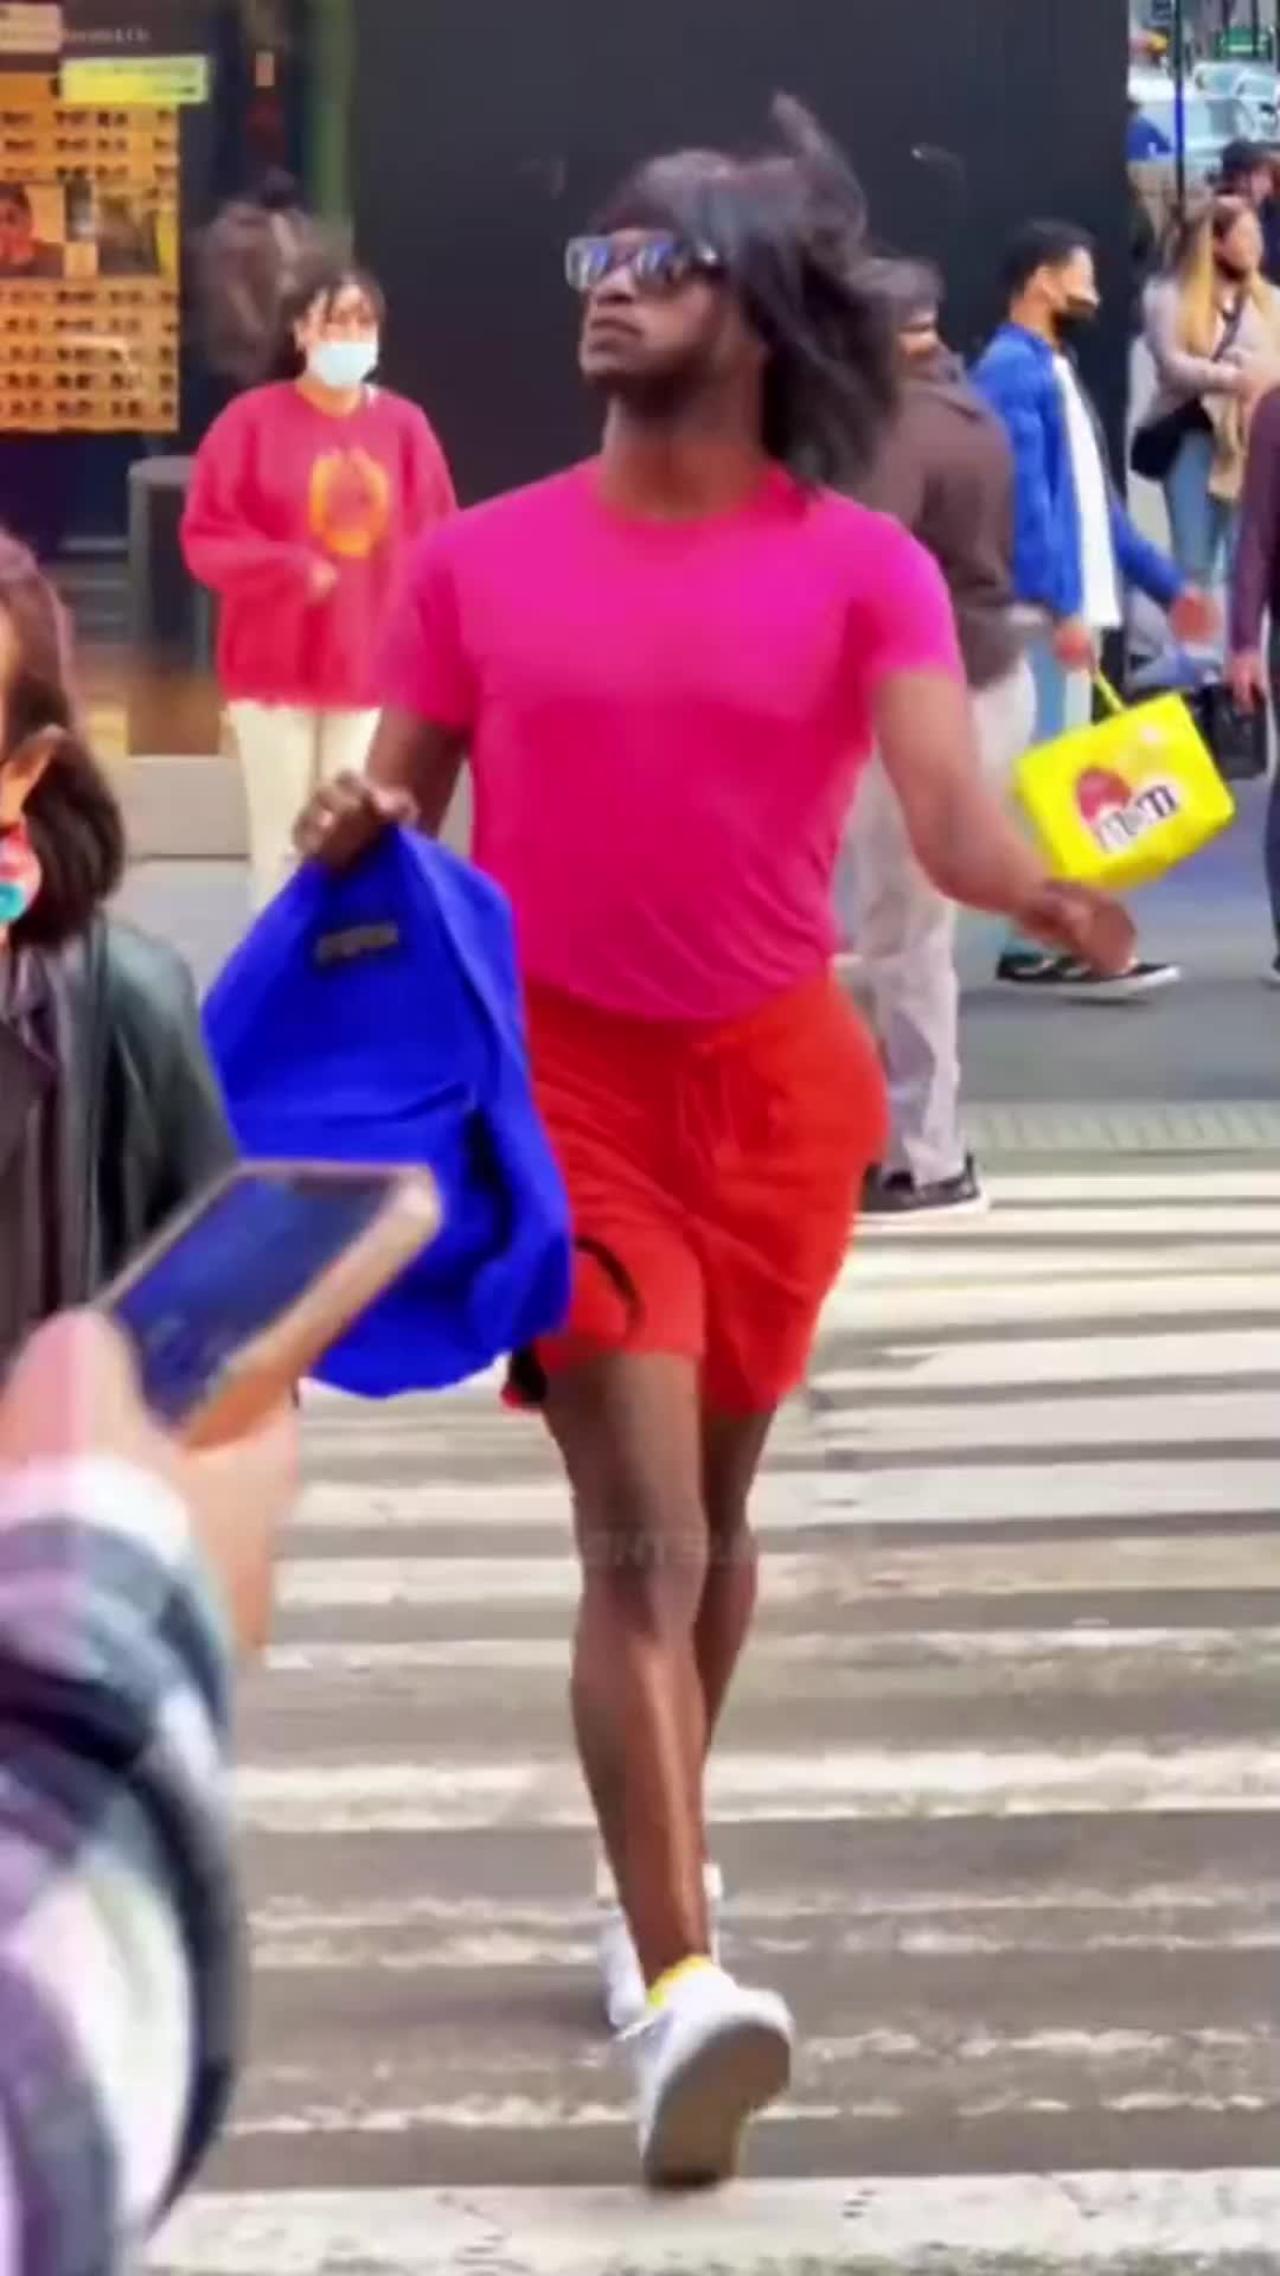 The normal phenomenon of New York in foreign funny videos